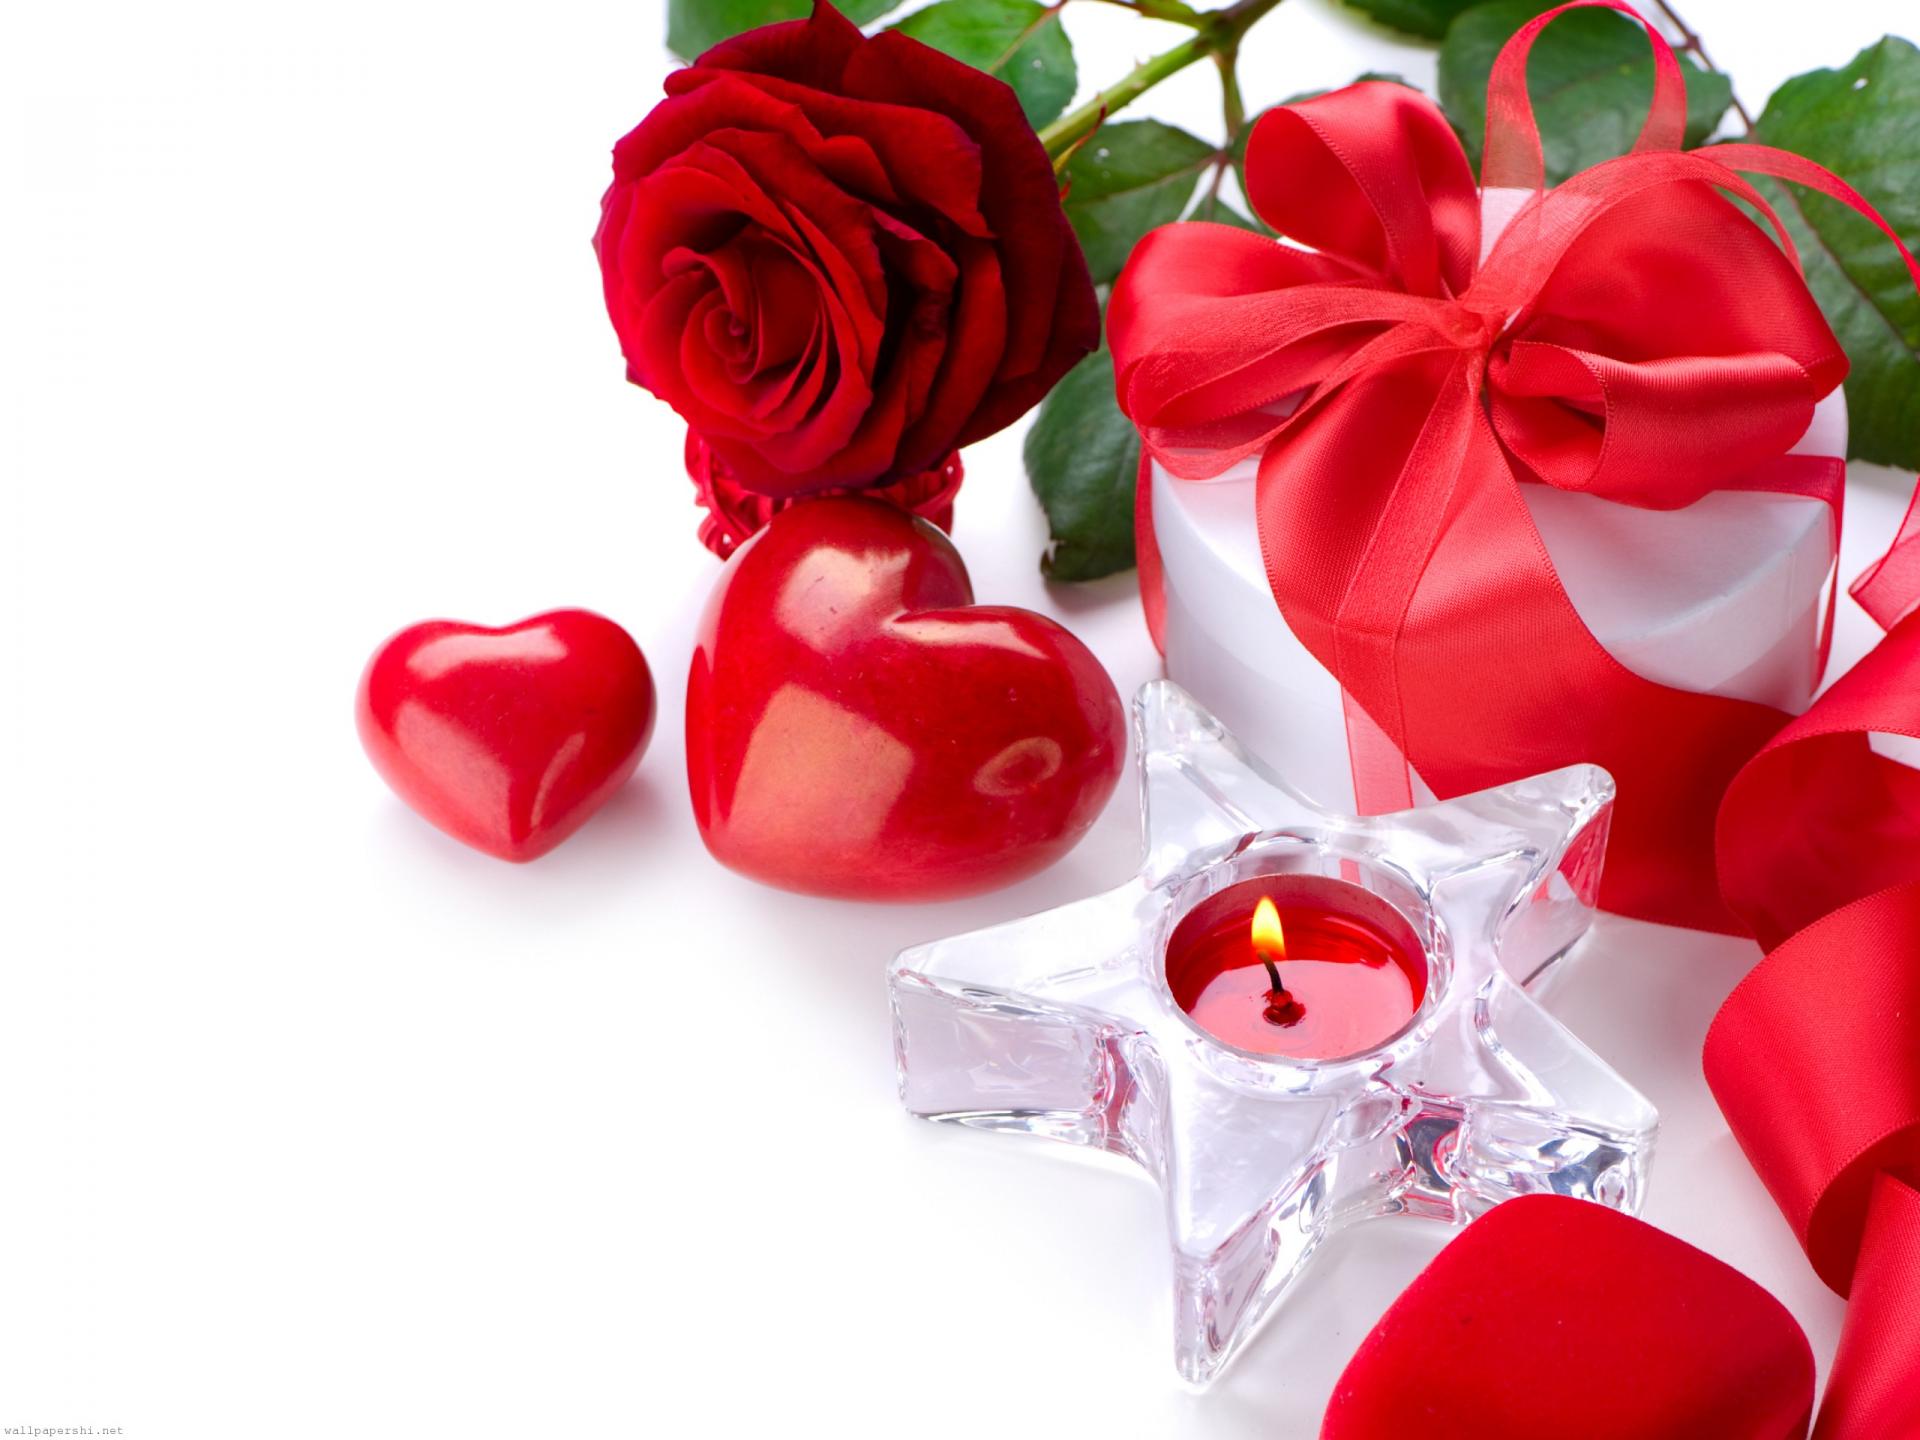 Red Flowers Roses A Candle Heart Gifts Crystal Holiday - Border Design For Valentines Day - HD Wallpaper 